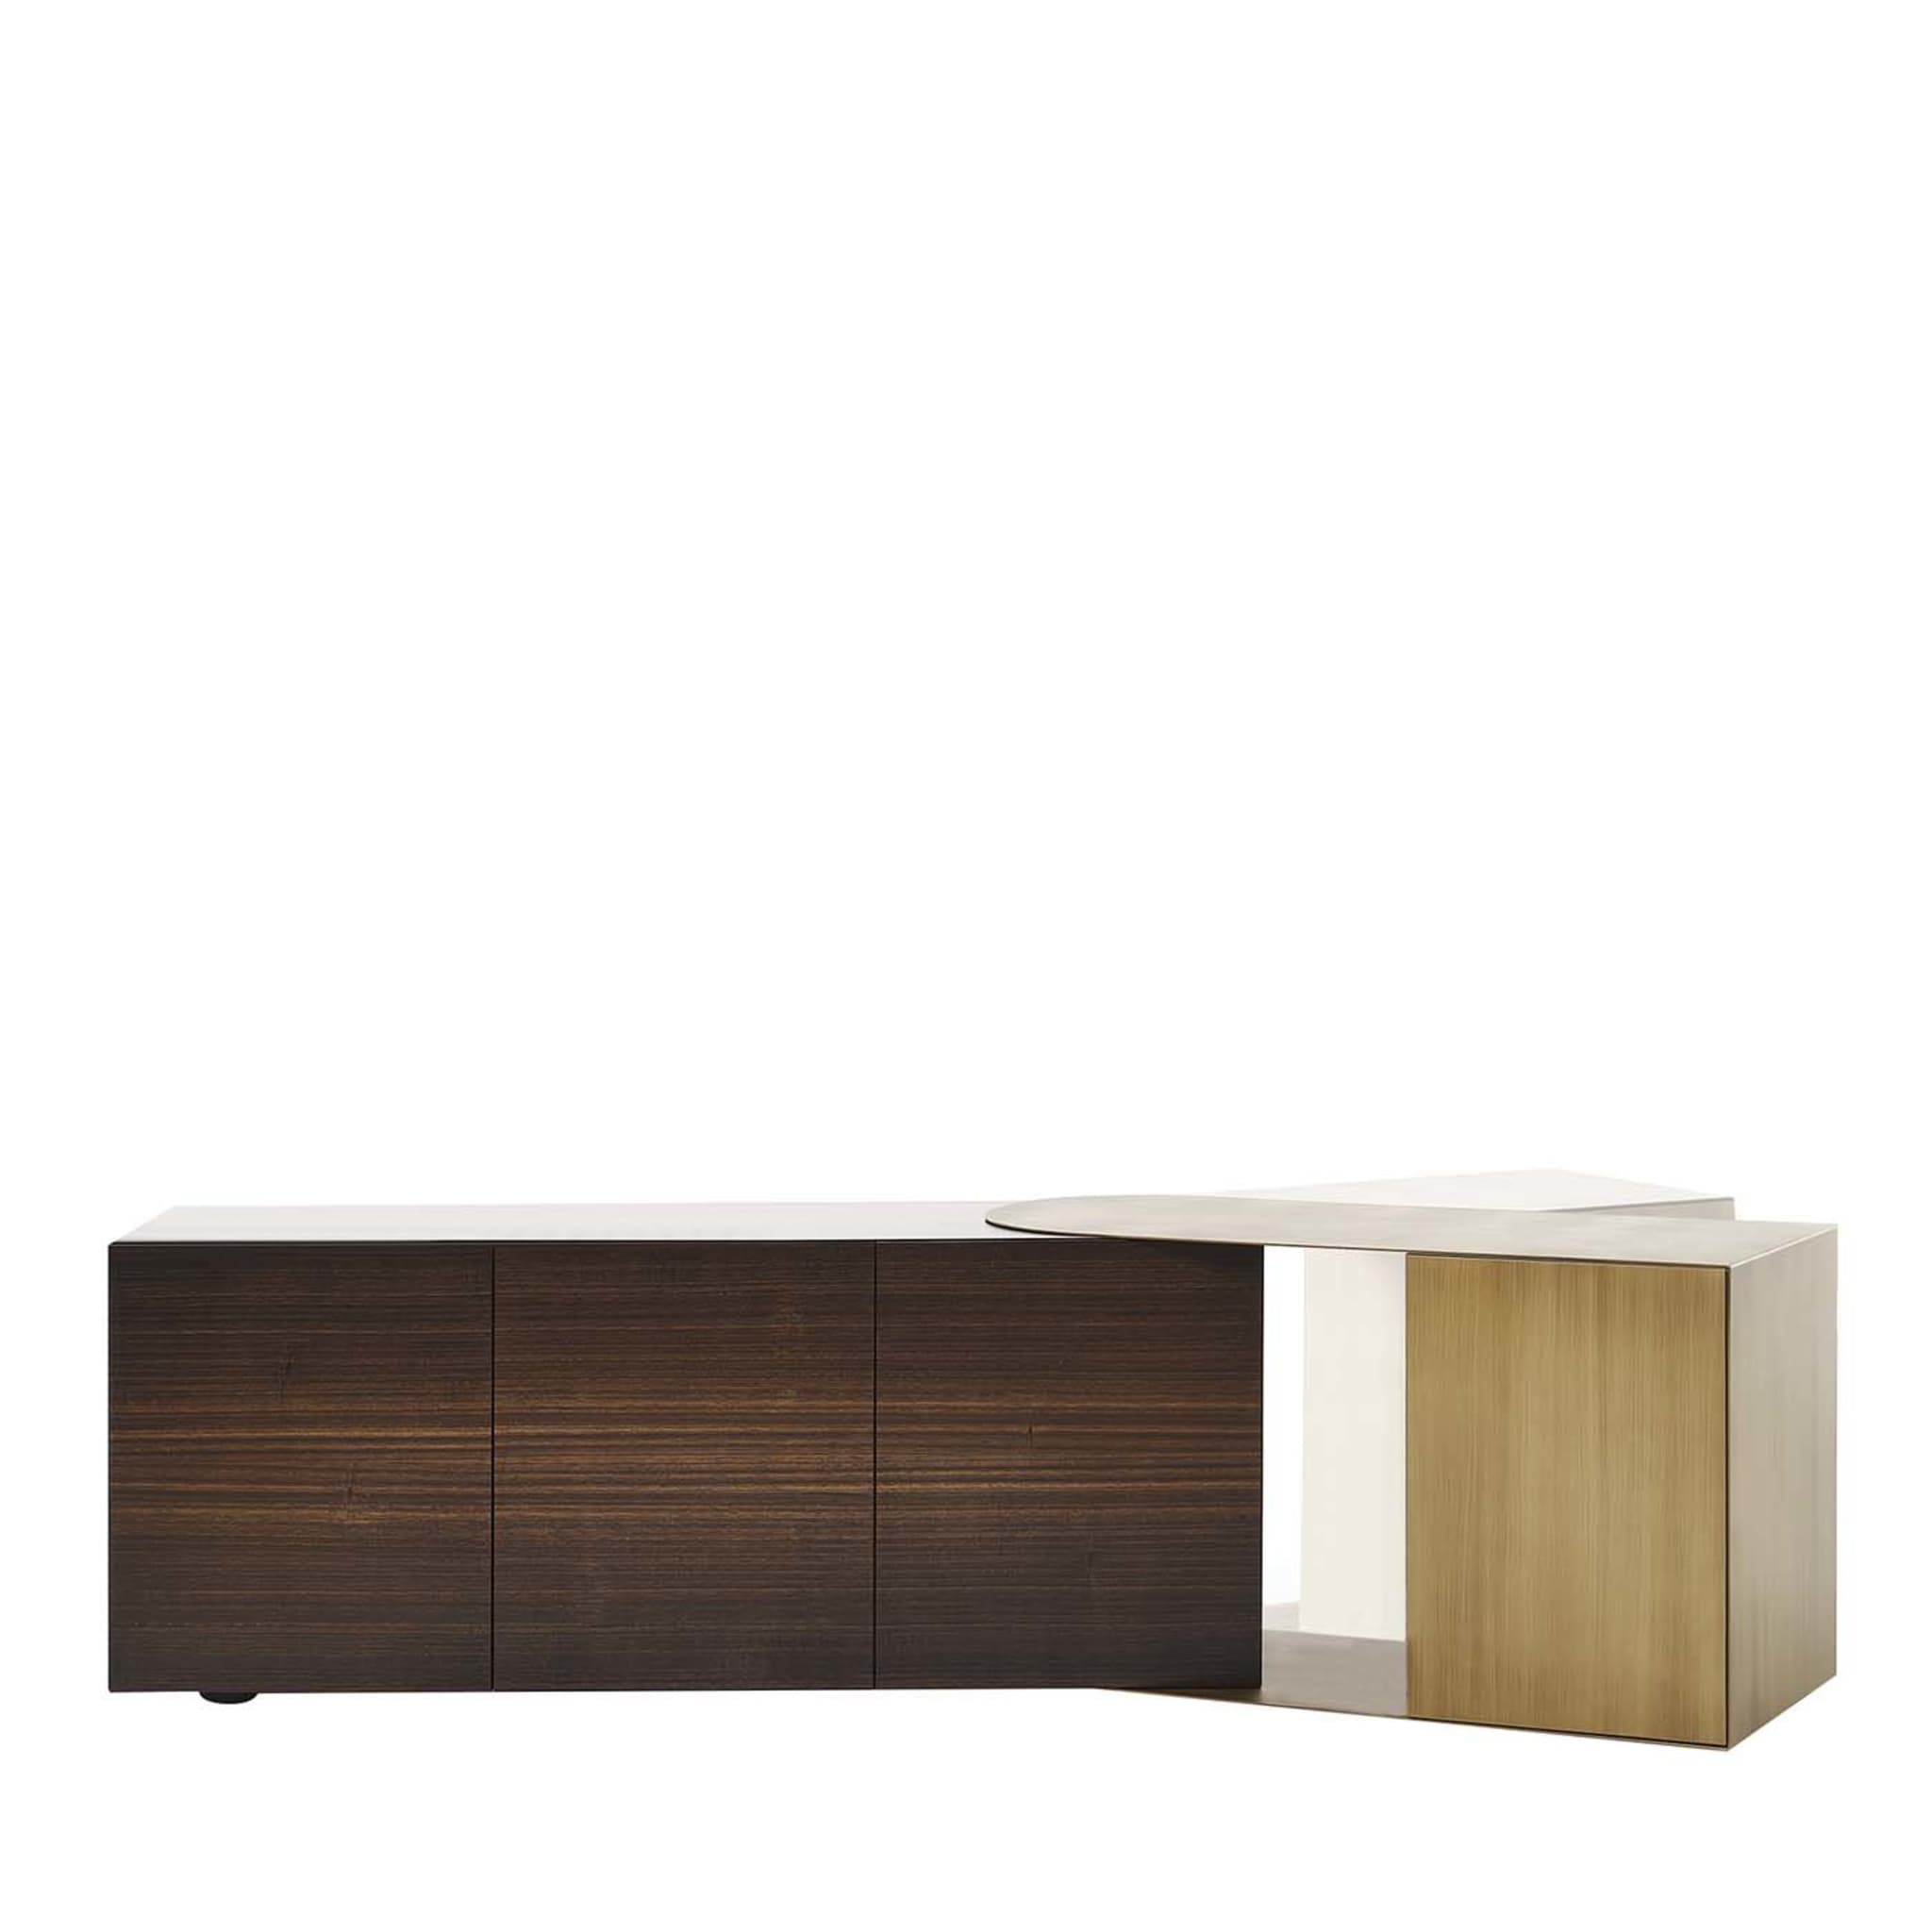 Partout Sideboard #2 by Studio 14 - Main view